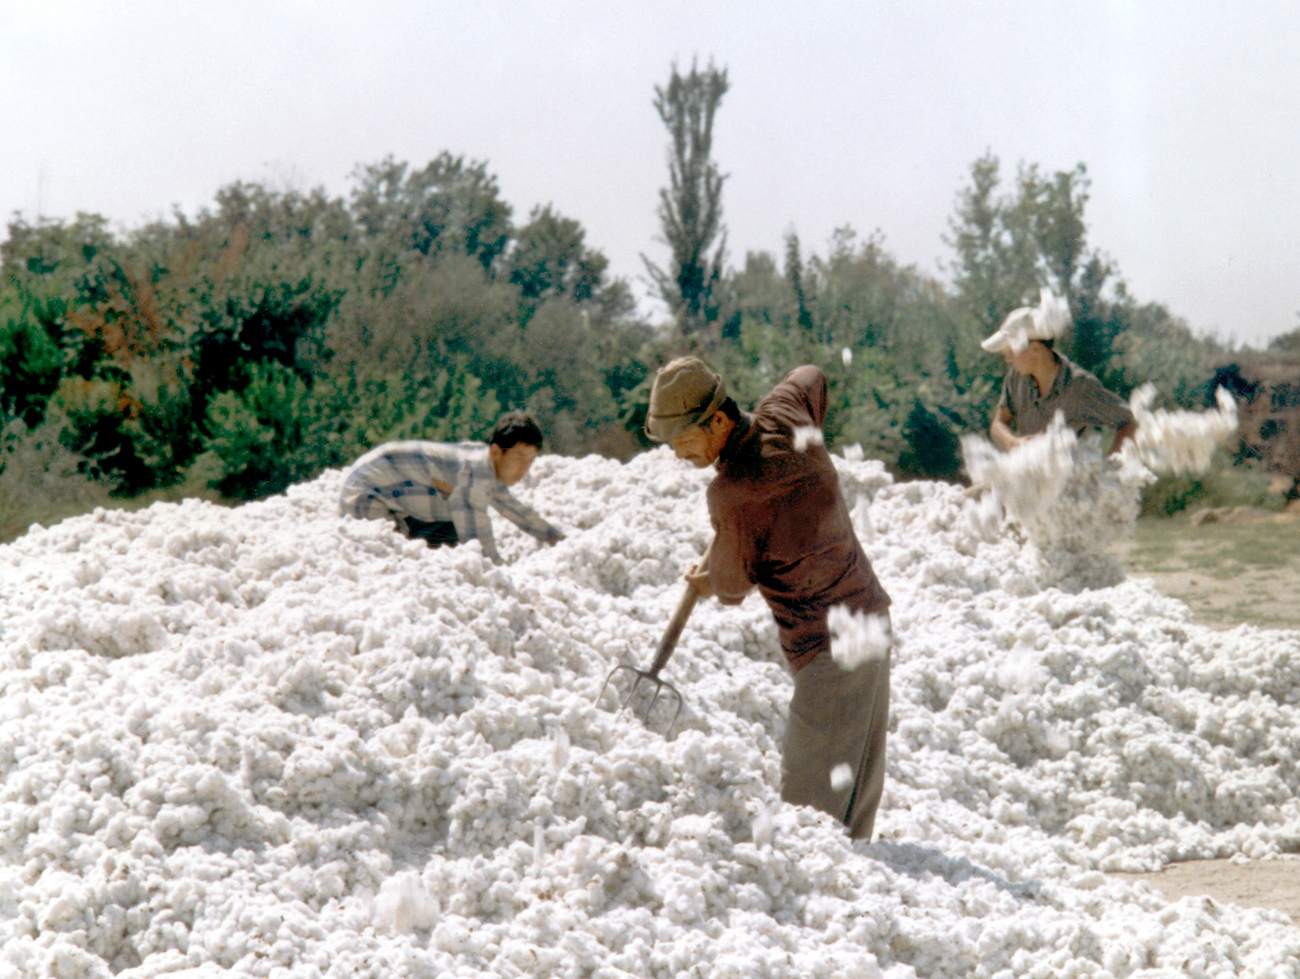 The first million of tons of raw cotton was picked up by Uzbek cotton-growers. The abundant crop of cotton (over 3.5 million tons ) is expected this year in this Central Asian Republic, 2003 / Valery Kharitonov / TASS